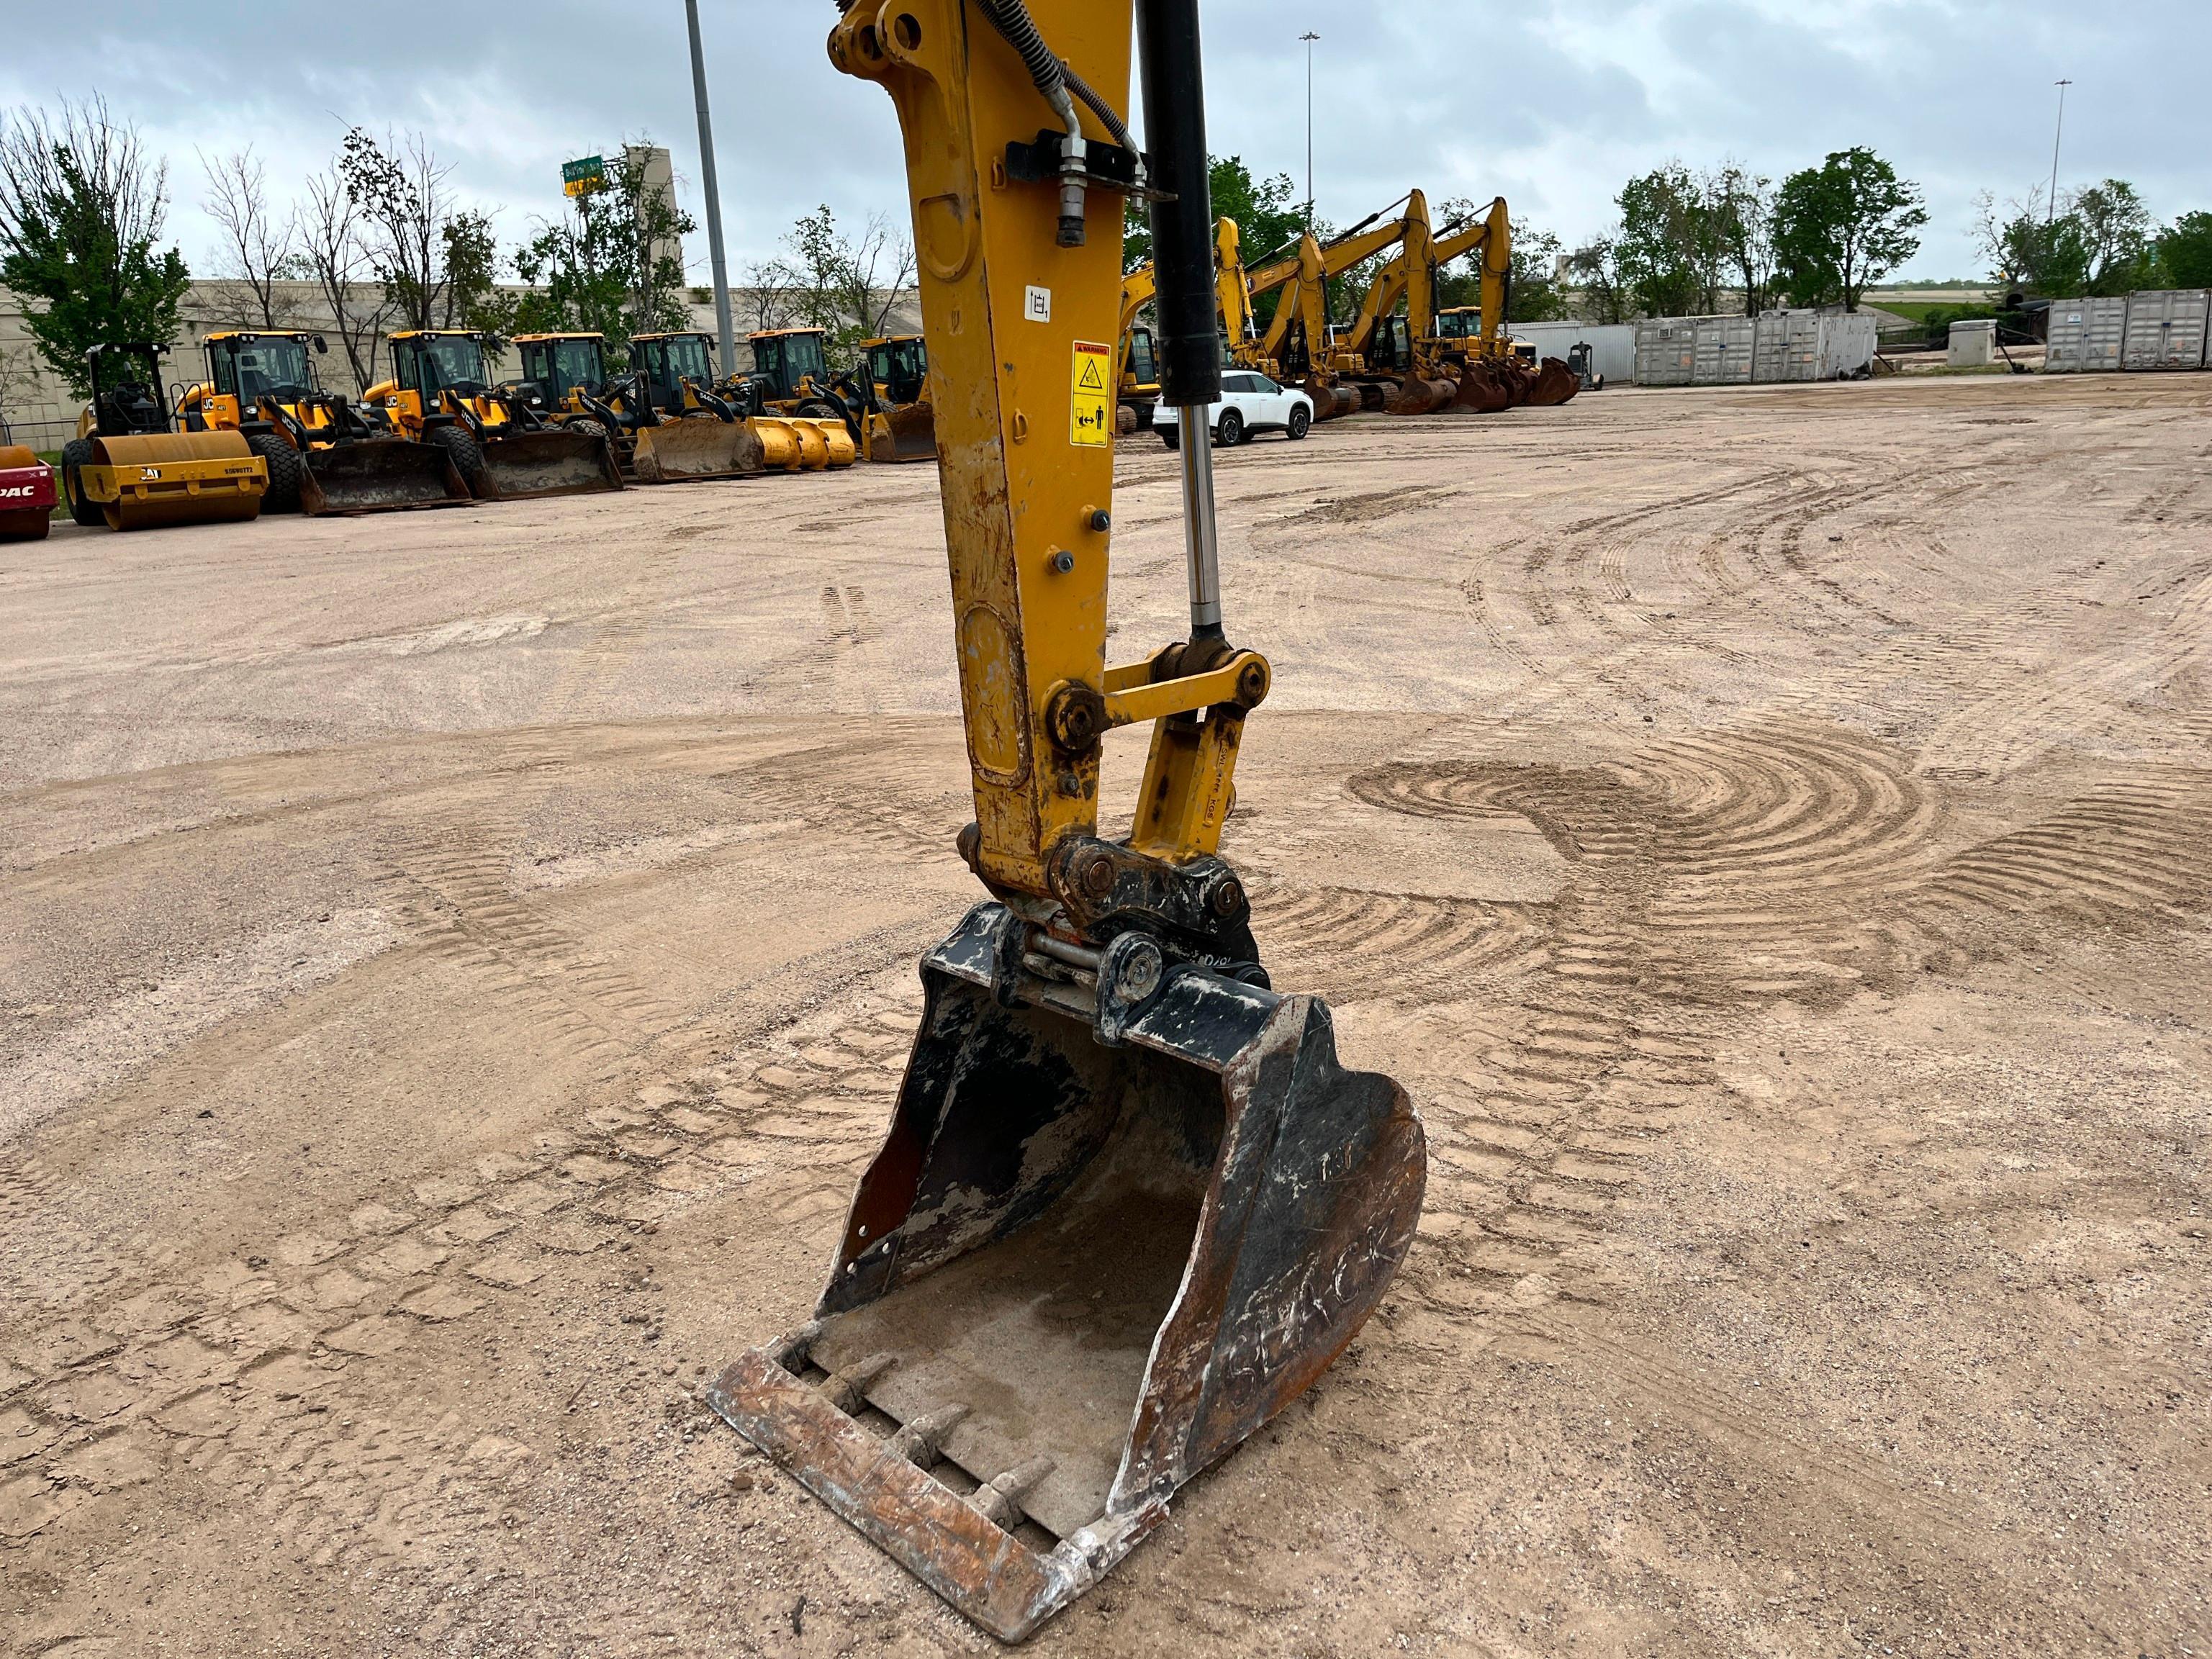 2023 CAT 308CR HYDRAULIC EXCAVATOR SN:807565 powered by Cat C3.3B diesel engine, equipped with Cab,